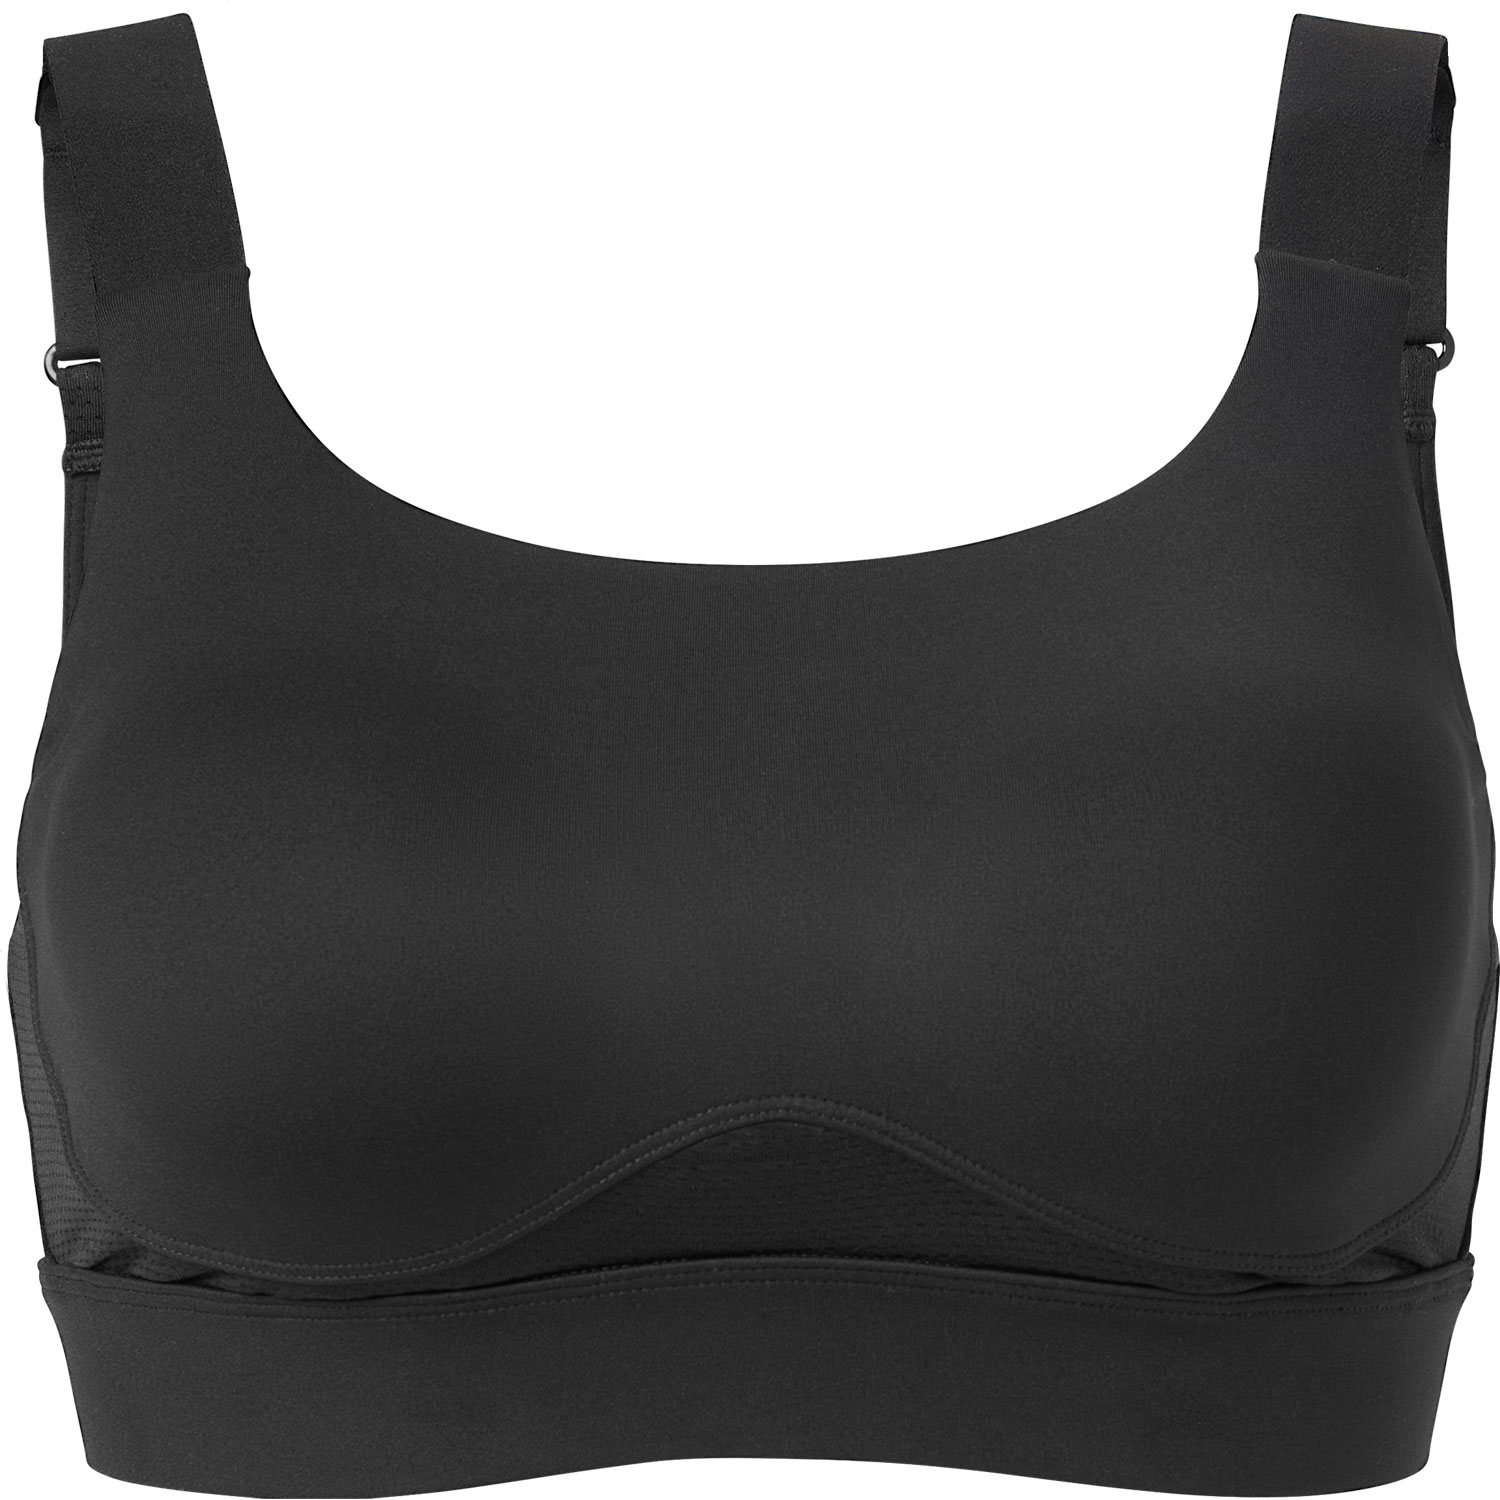 Duluth Trading Company Bras